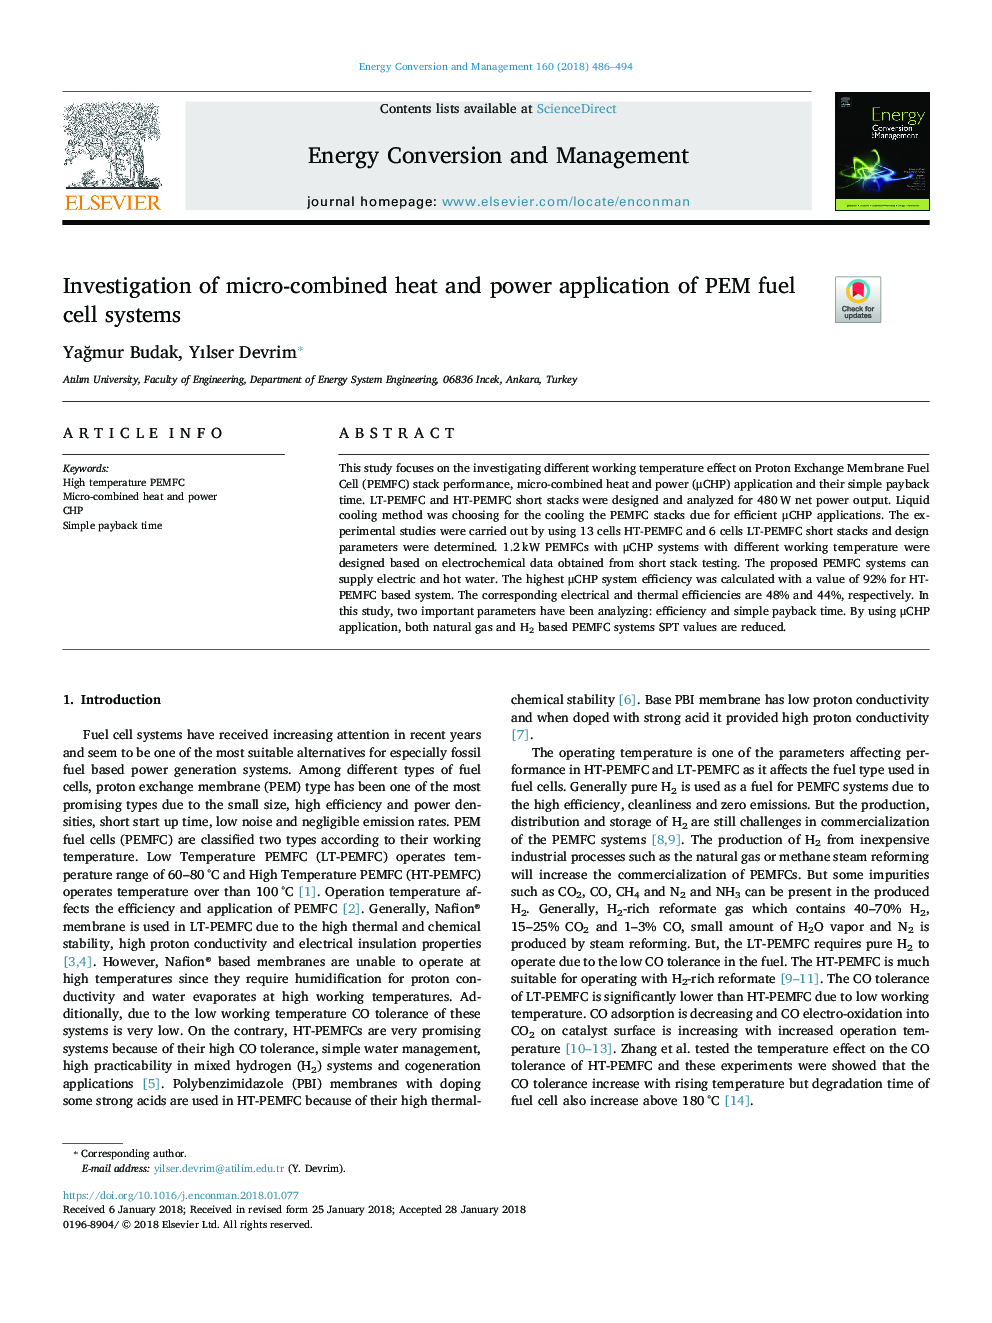 Investigation of micro-combined heat and power application of PEM fuel cell systems